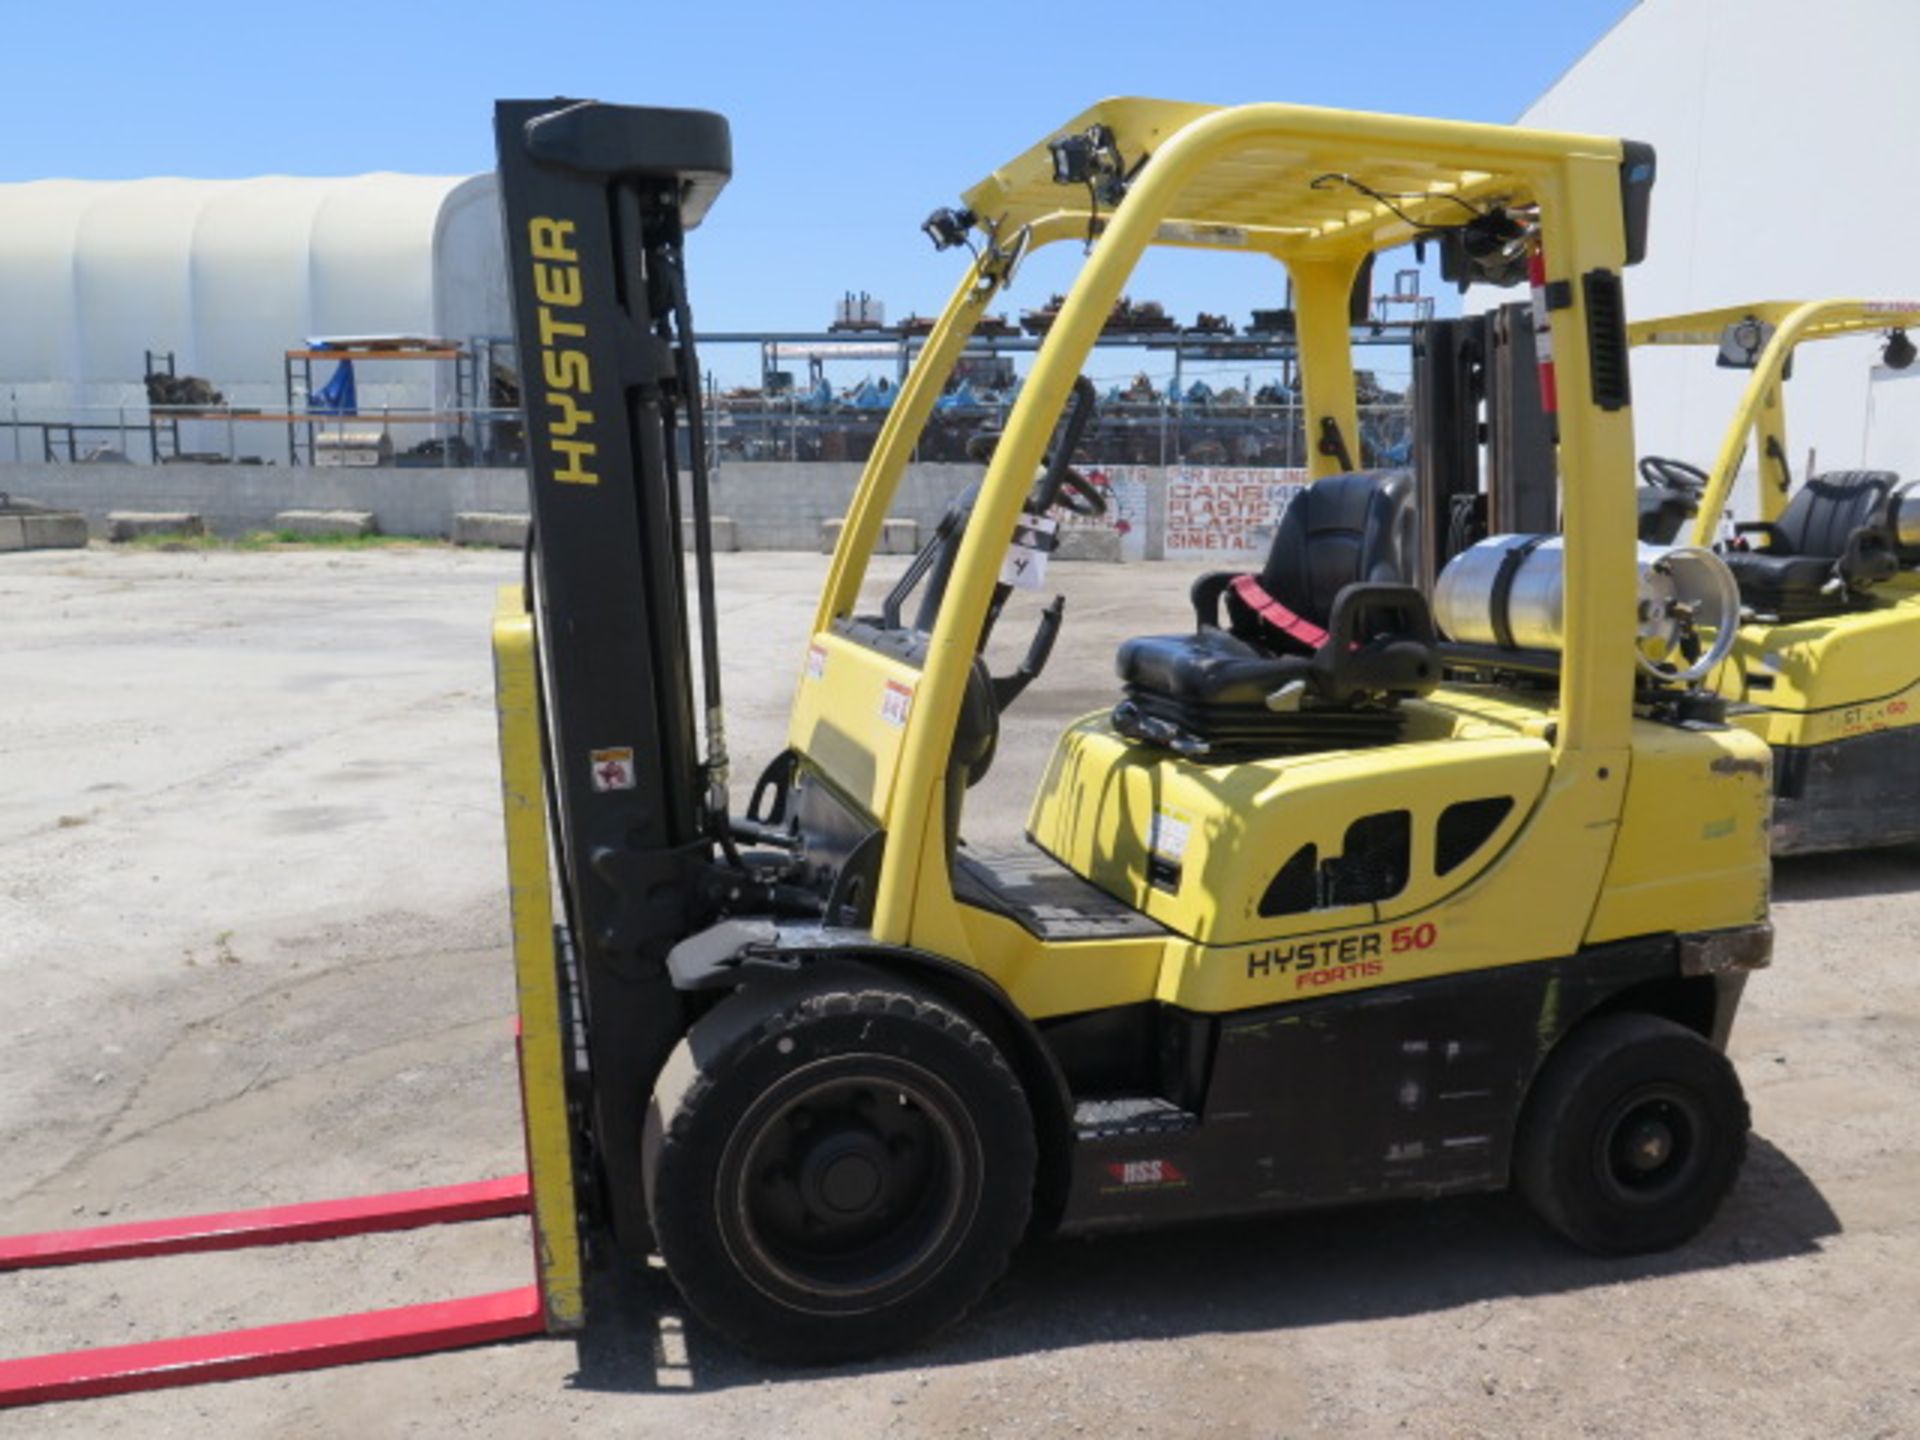 2018 Hyster H50FT 5000 Lb LPG Forklift s/n P177V06250 w/ 3-Stage, 189” Lift, Side Shift, SOLD AS IS